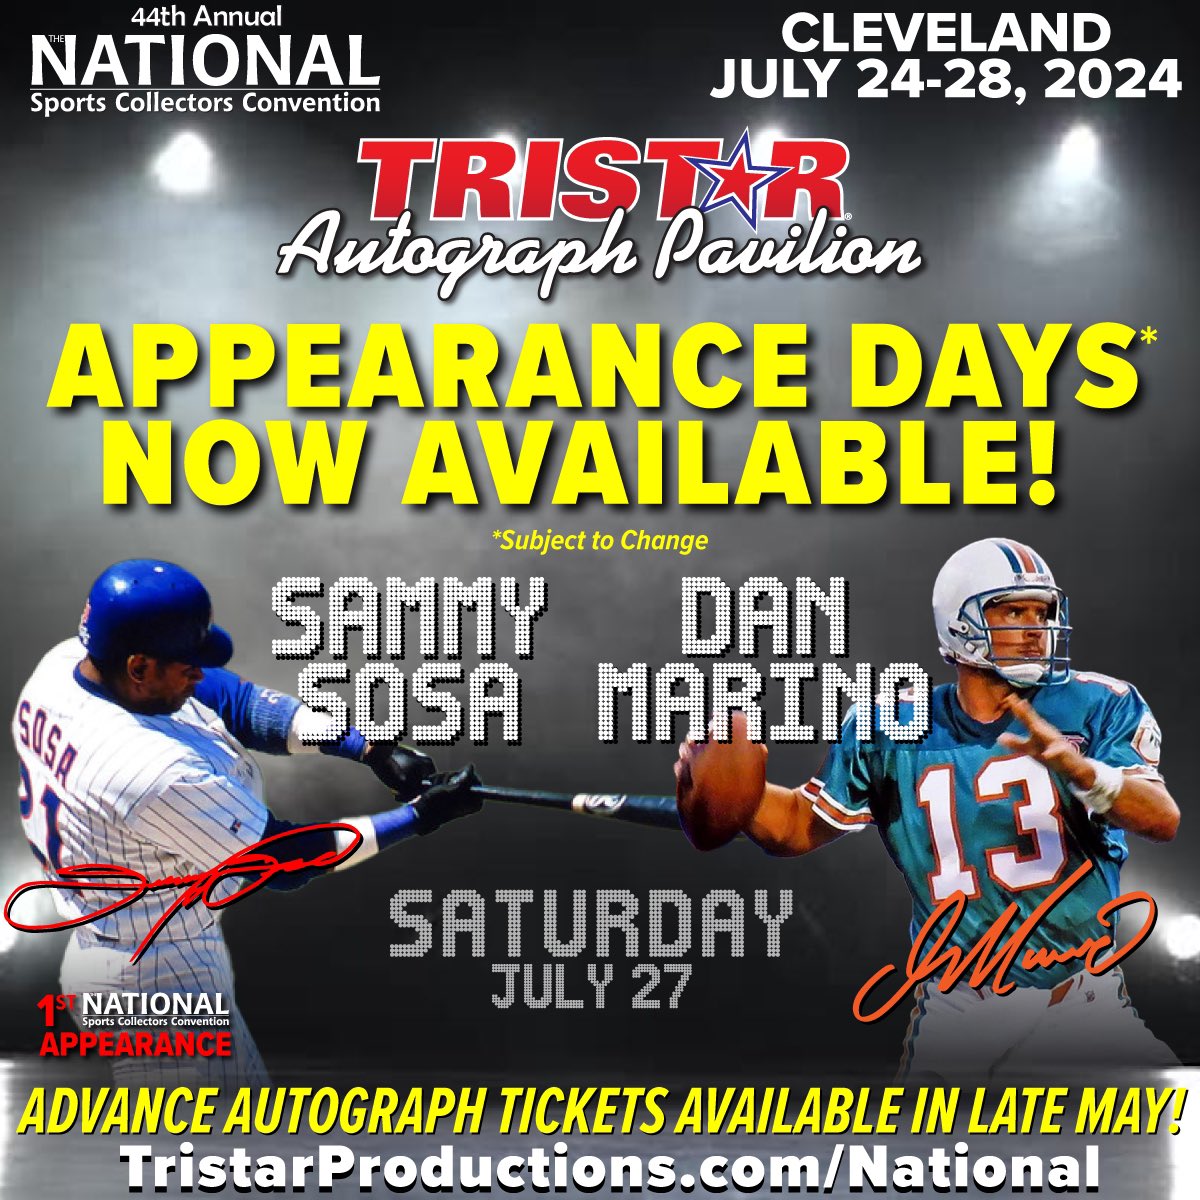 🚨Appearance days for all announced @NSCCShow TRISTAR Autograph Pavilion celebrity guests are now available! More signers will be announced in the coming weeks. Advance autograph tickets available in late May. tristarproductions.com/National